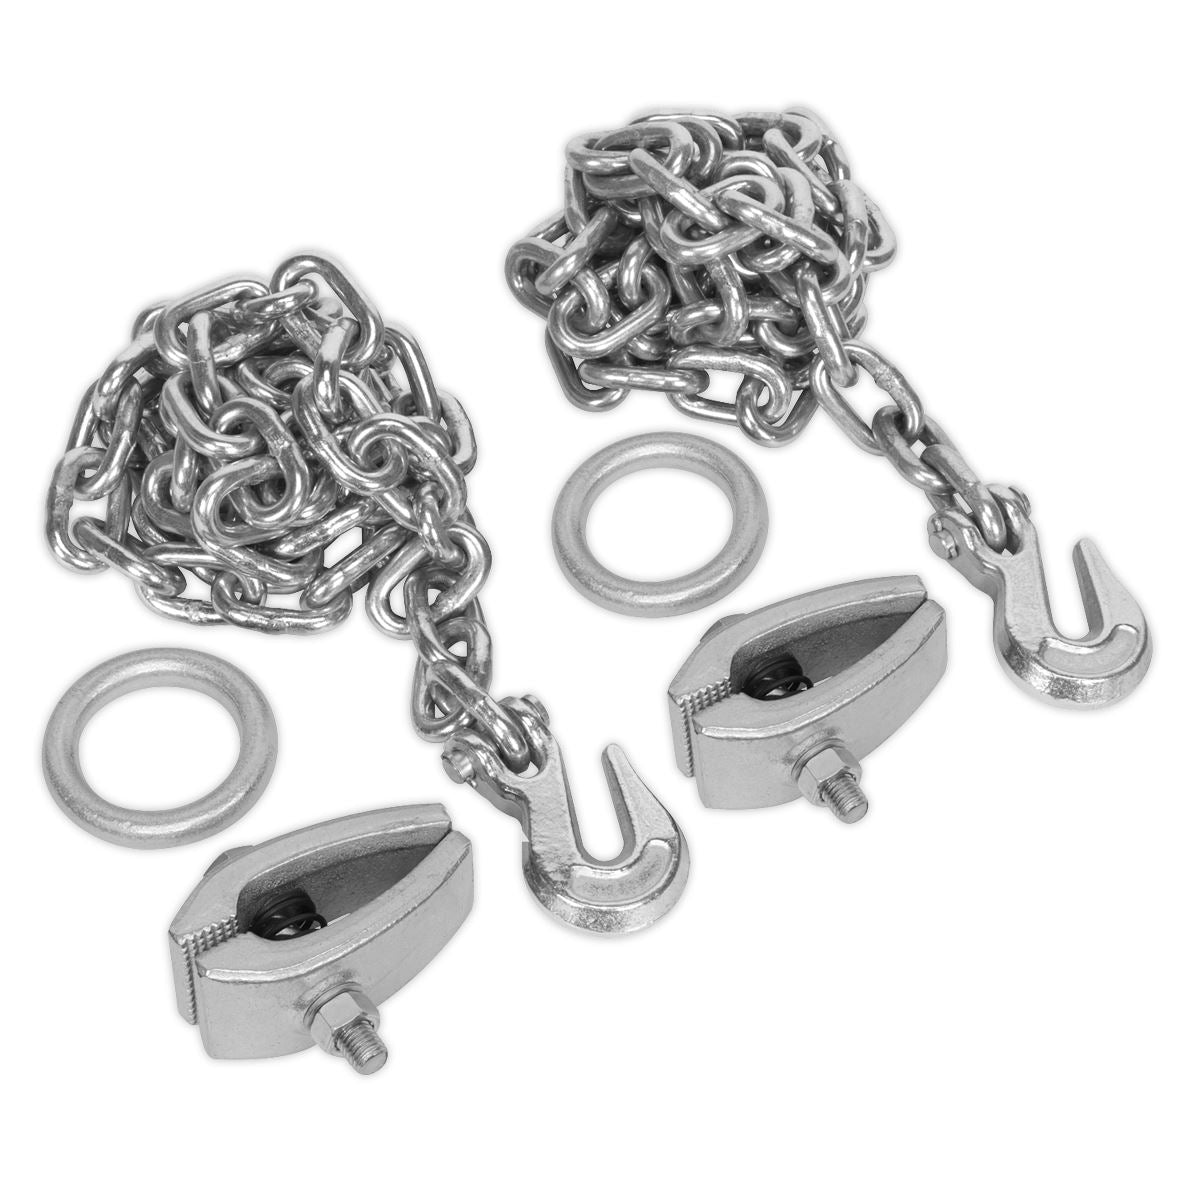 Sealey Chain Kit 2 x 2m Chains 2 x Clamps